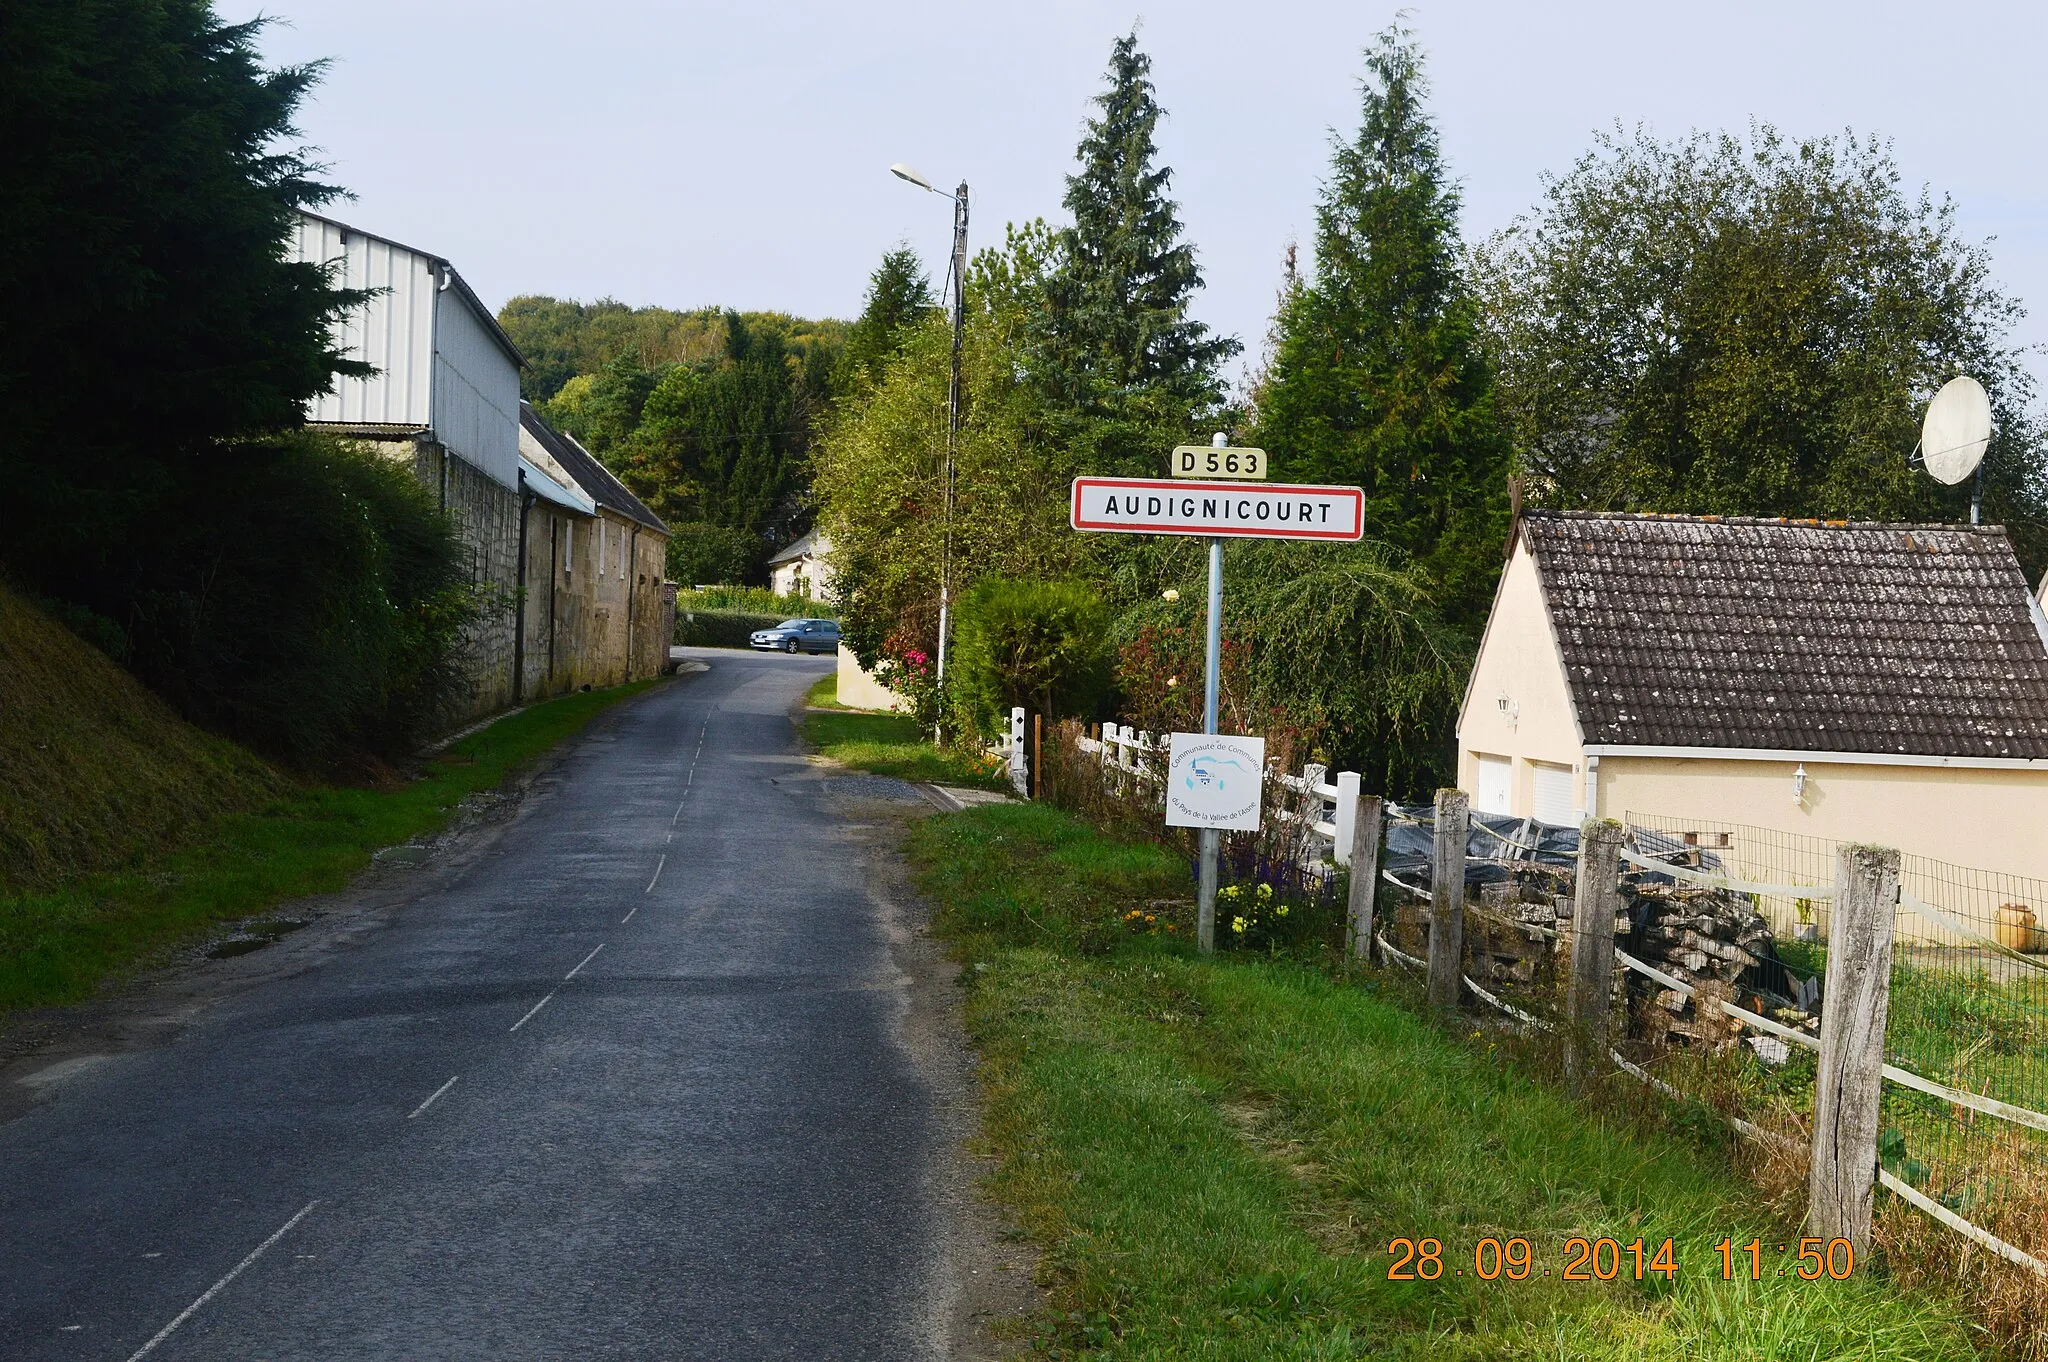 Photo showing: The entry to Audignicourt